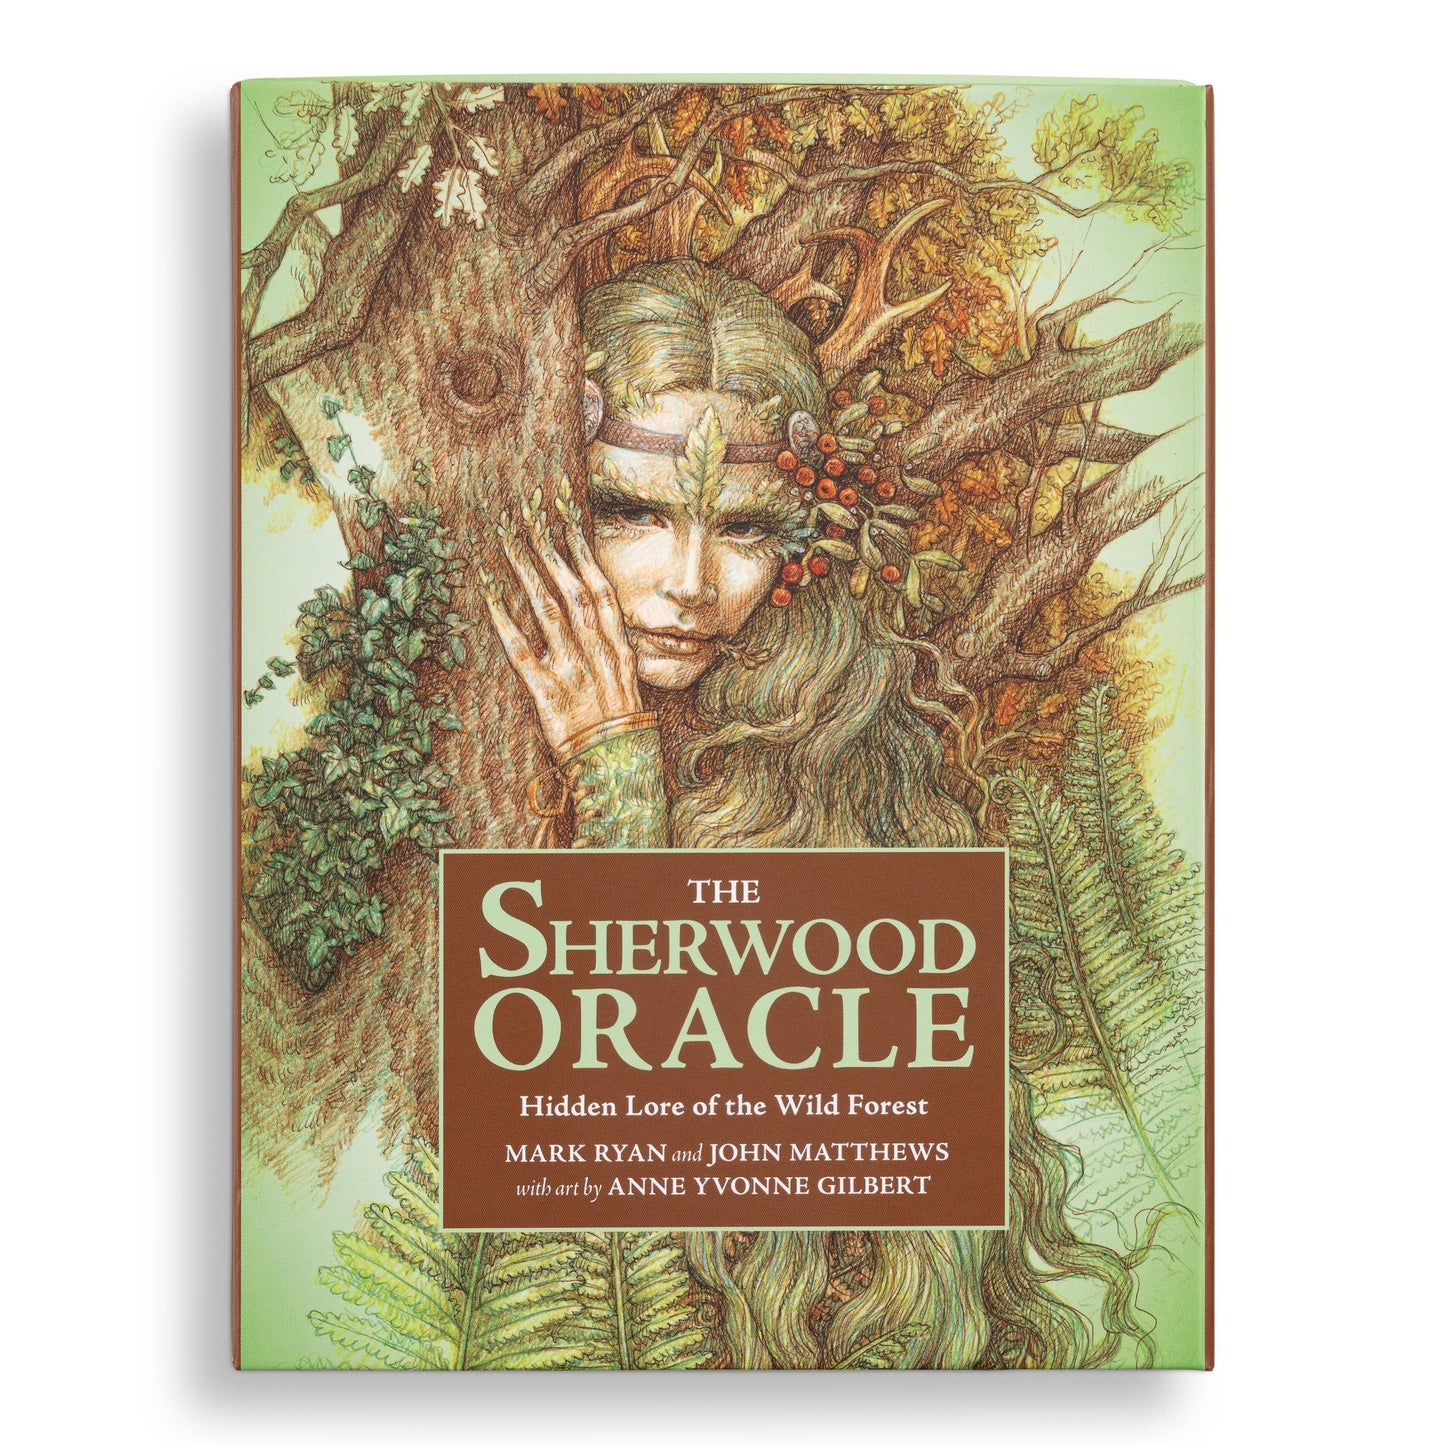 The Sherwood Oracle: Hidden Lore of the Wild Forest